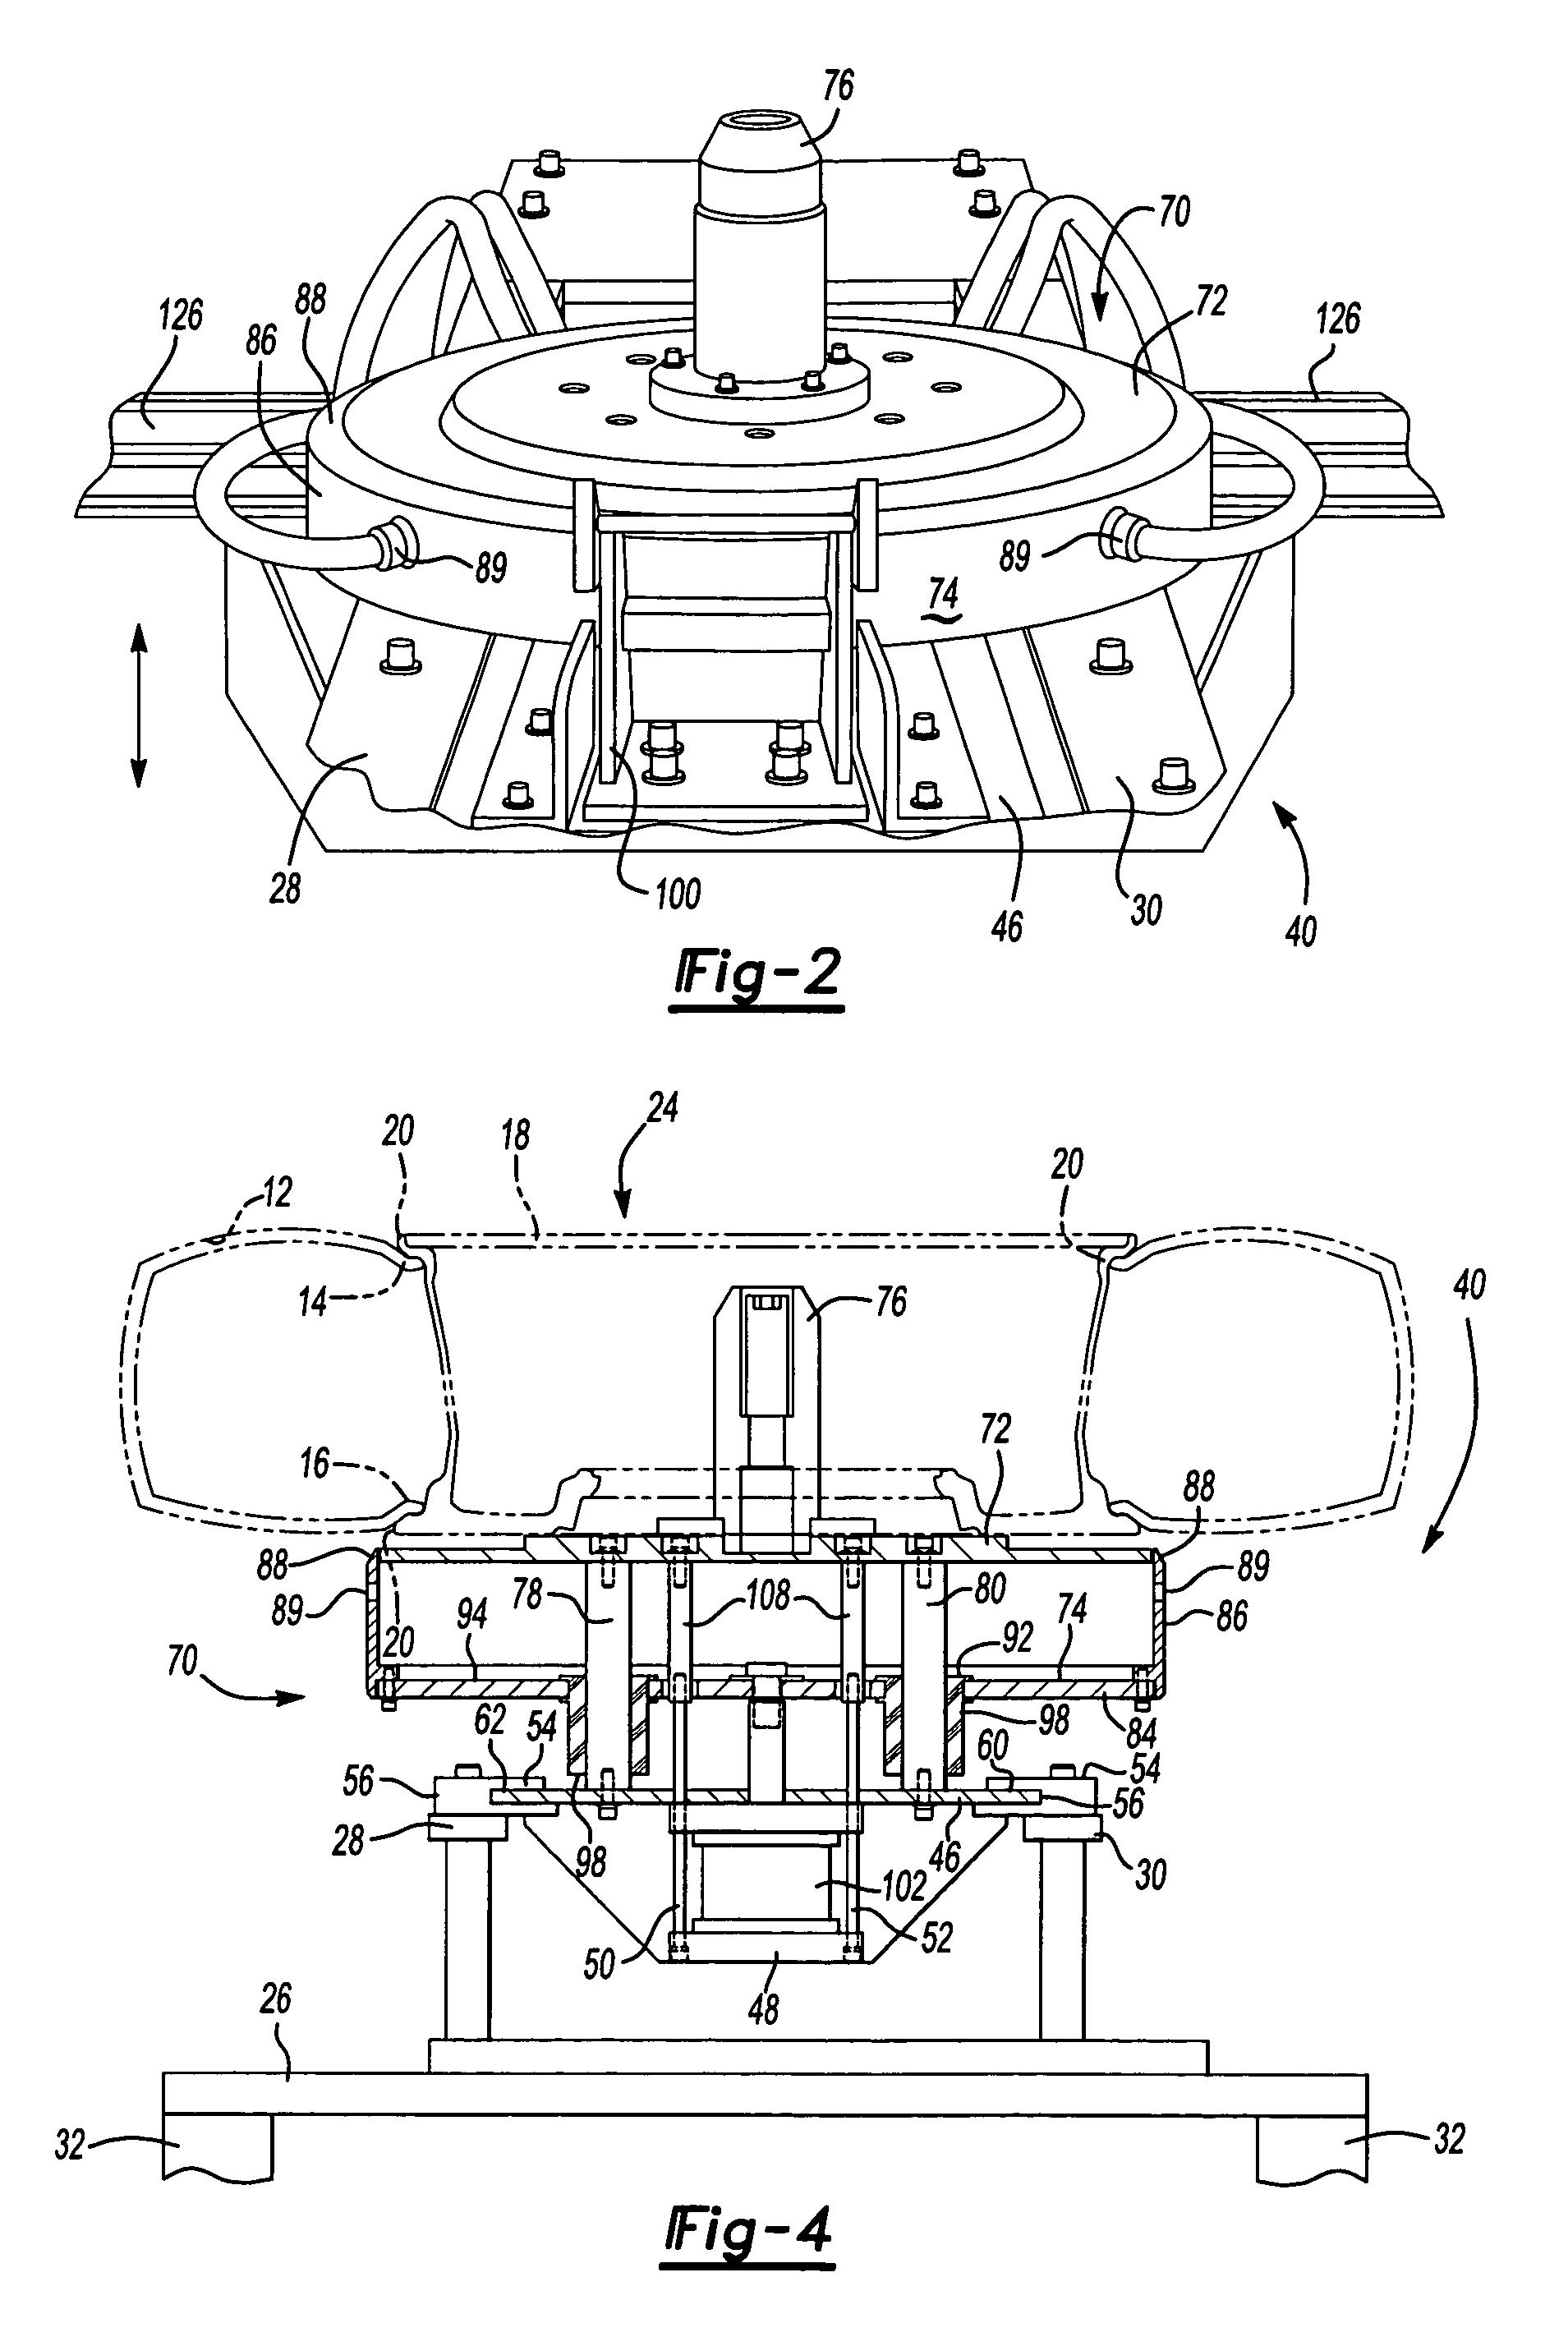 Apparatus for mounting and inflating a tire and wheel assembly